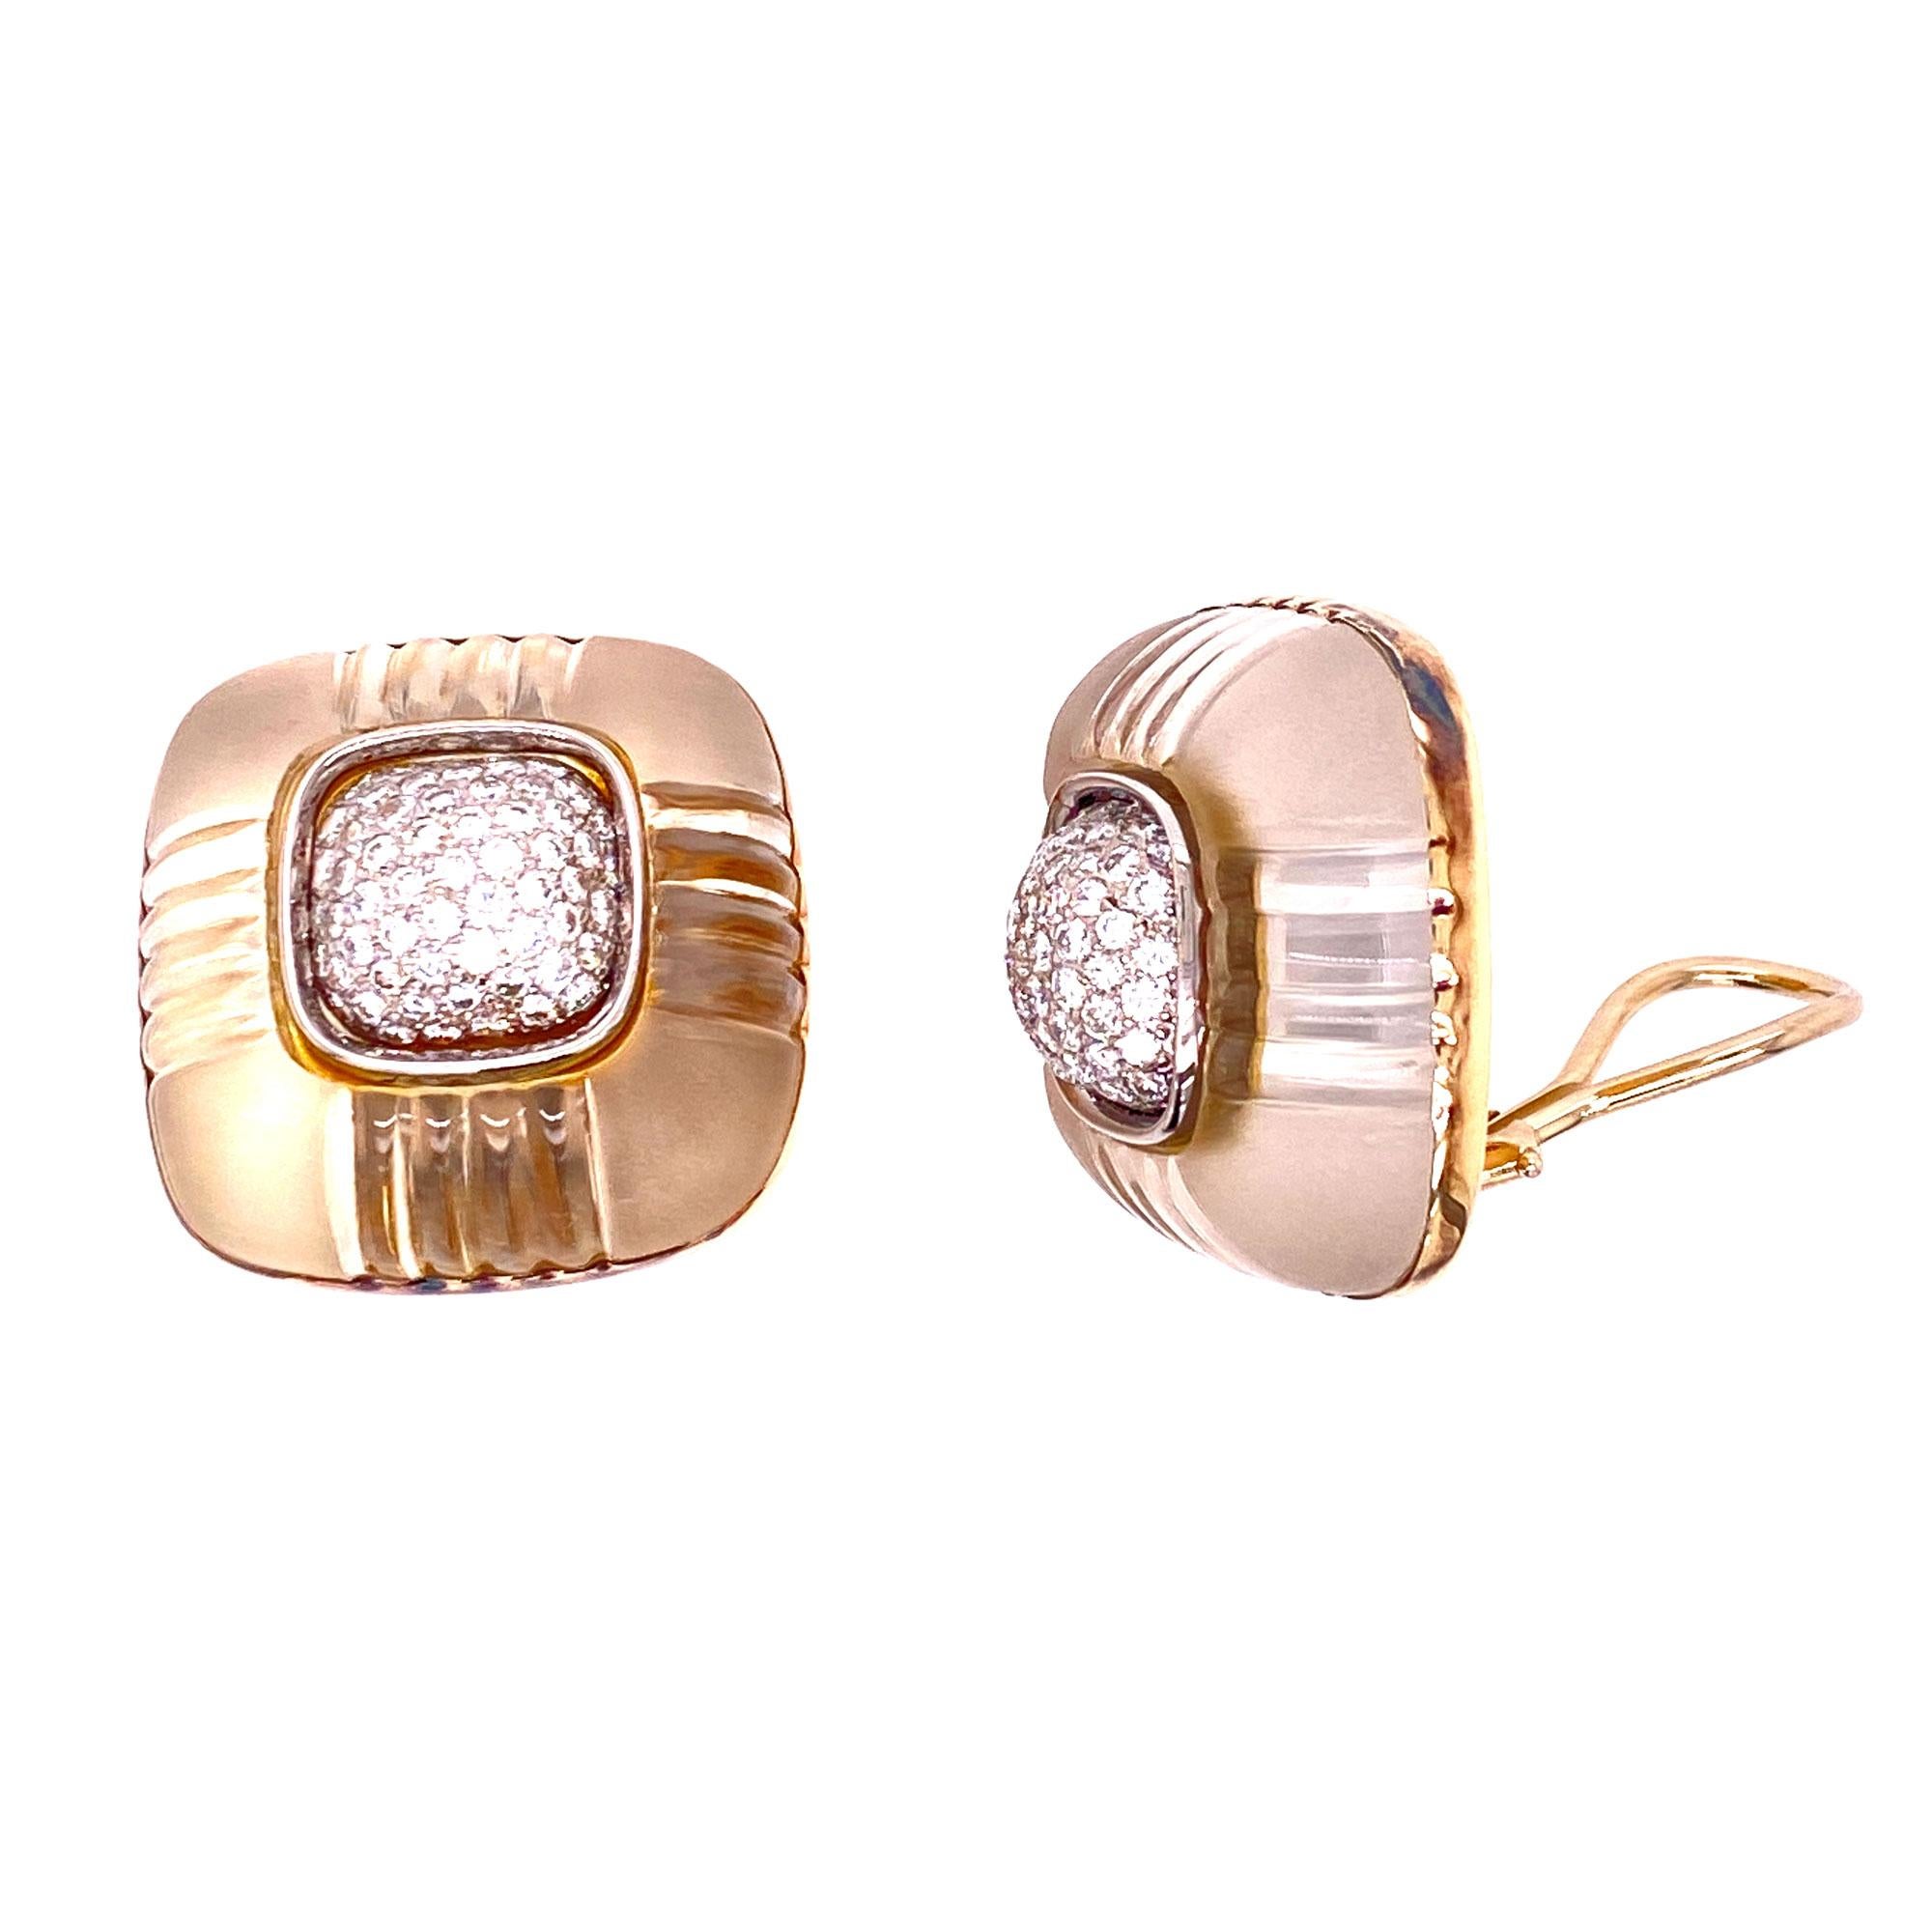 Beautiful diamond and frosted rock crystal earrings by designer Trianon. The square clip earrings feature round brilliant cut  diamonds weighing 2.00 carat total weight. The diamonds are surrounded by frosted carved rock crystal and 14 karat yellow